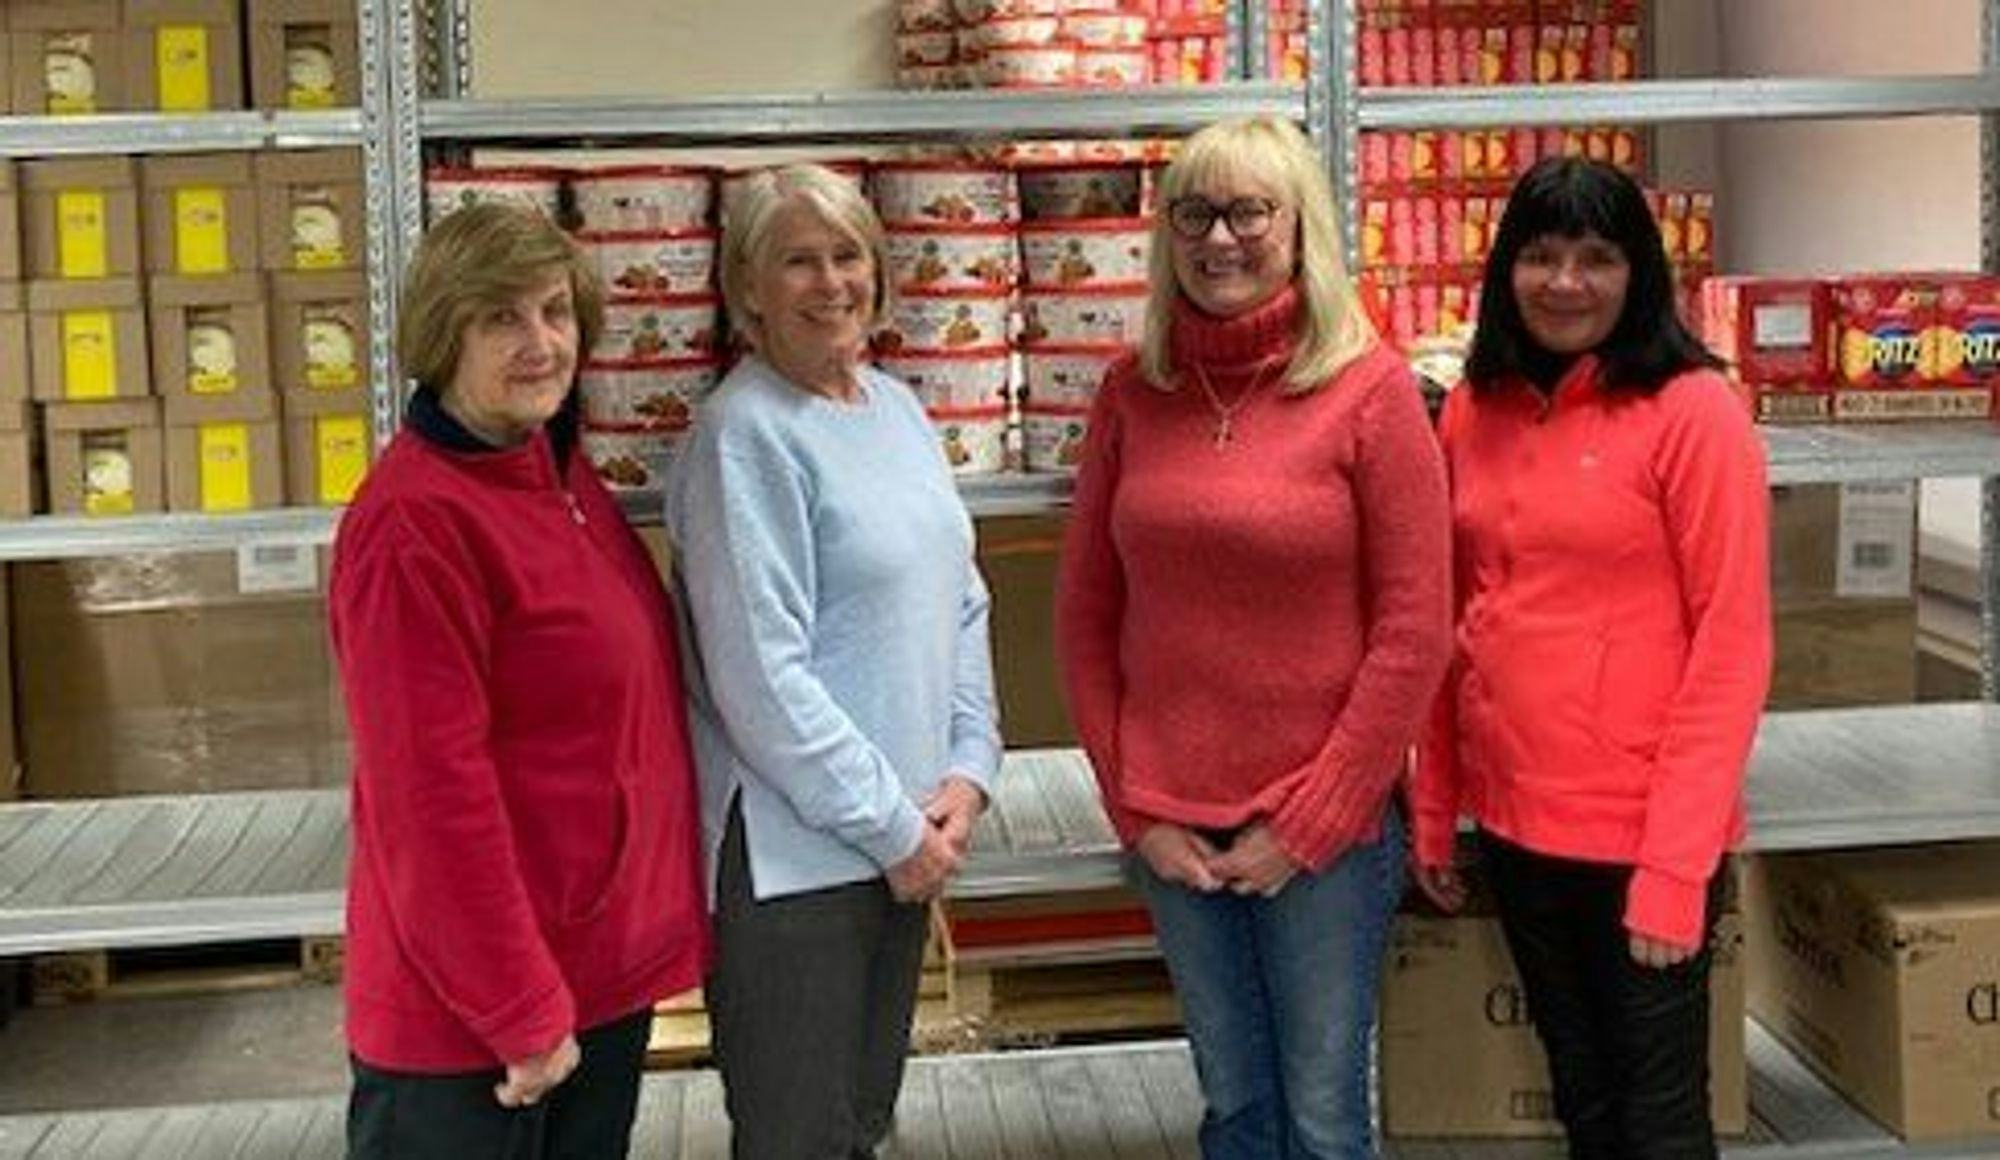 The photo shows four women, three in red and one in blue, smiling and standing together in front of supermarket shelves stocked with products